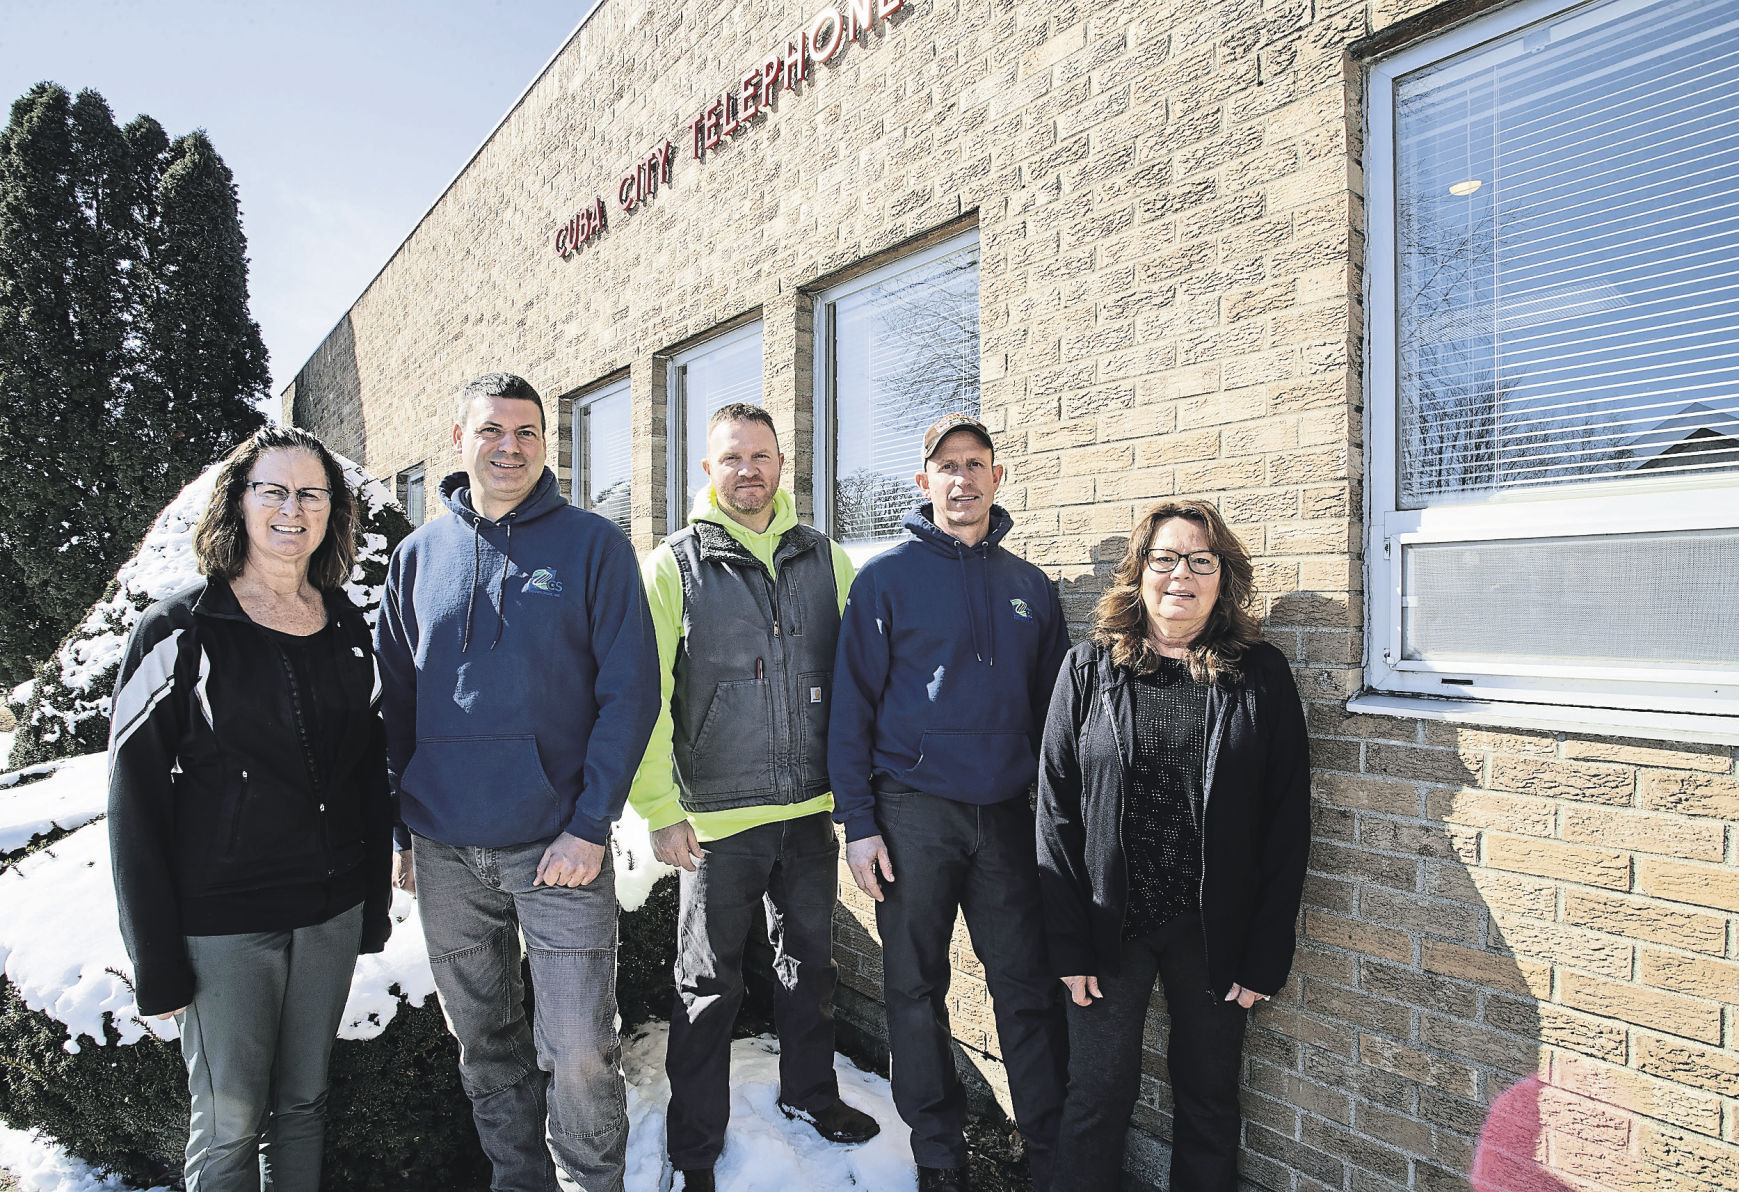 Cuba City Telephone Co. employees Deb Schuppener, Nick Averkamp, Jesse Longhenry, Jerry Cullen and Dayna Wieberding stand in front of the longtime Cuba City, Wis., business.    PHOTO CREDIT: SYSTEM